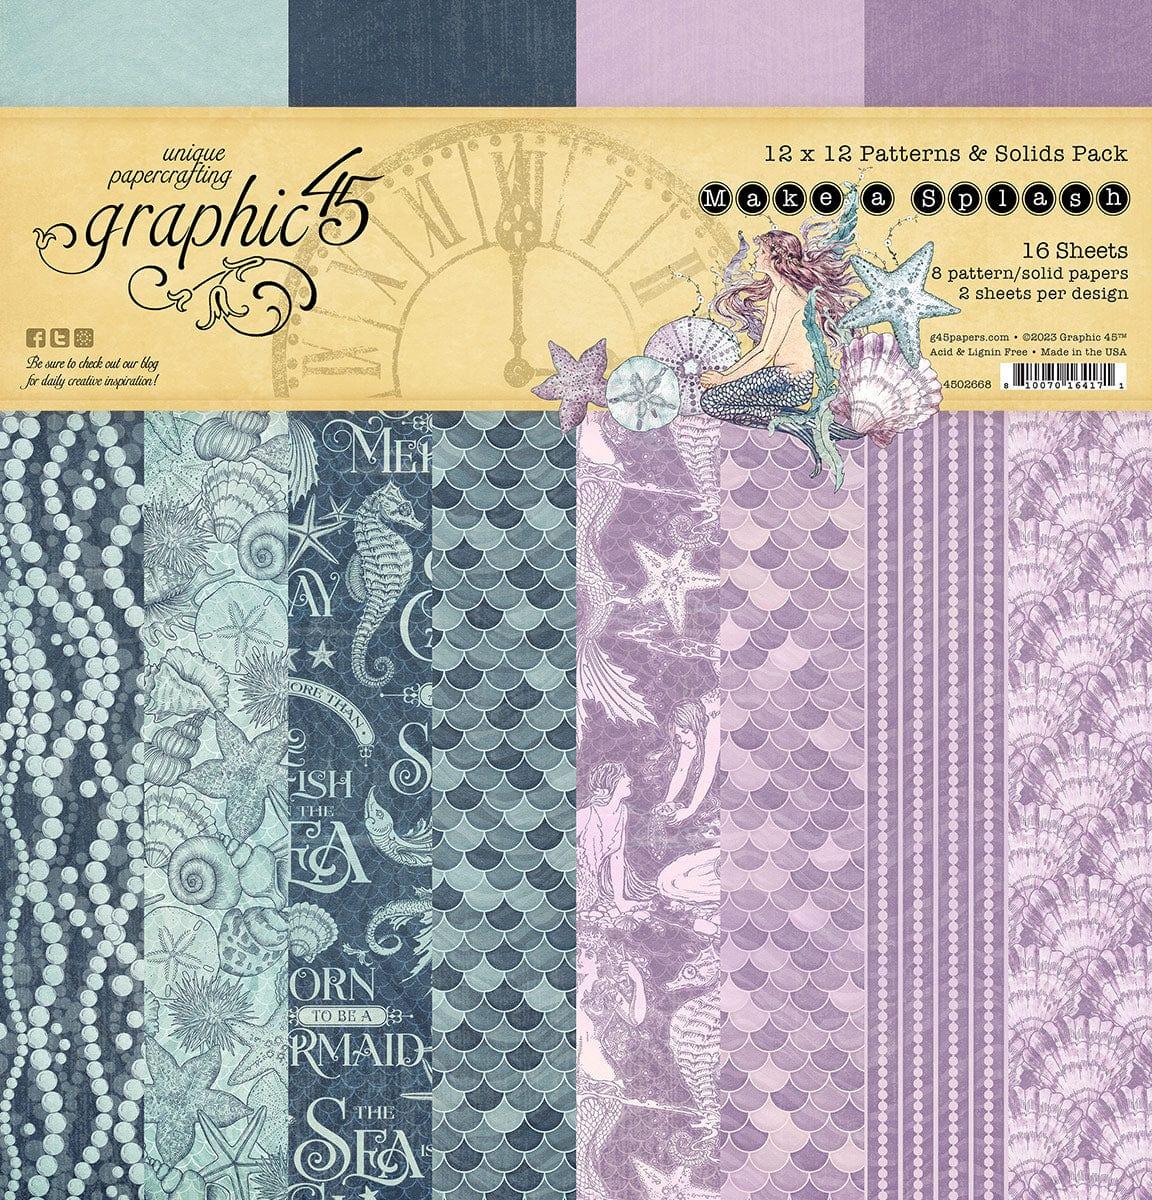 Make A Splash Collection 12 x 12 Patterns & Solids Scrapbook Paper Pack by Graphic 45 - Scrapbook Supply Companies